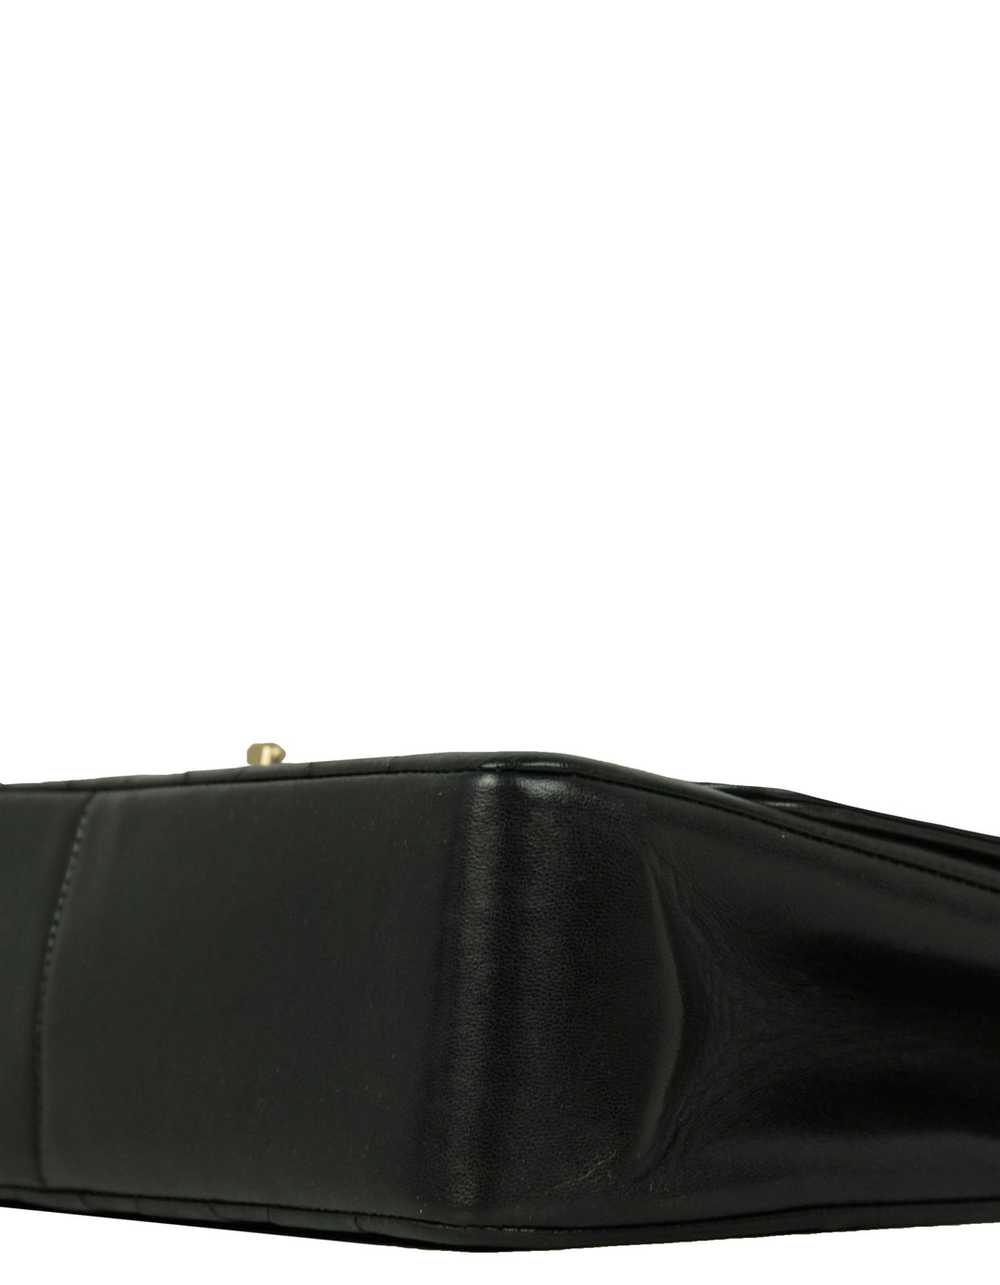 Chanel Black Lambskin Leather Quilted Medium Sing… - image 4